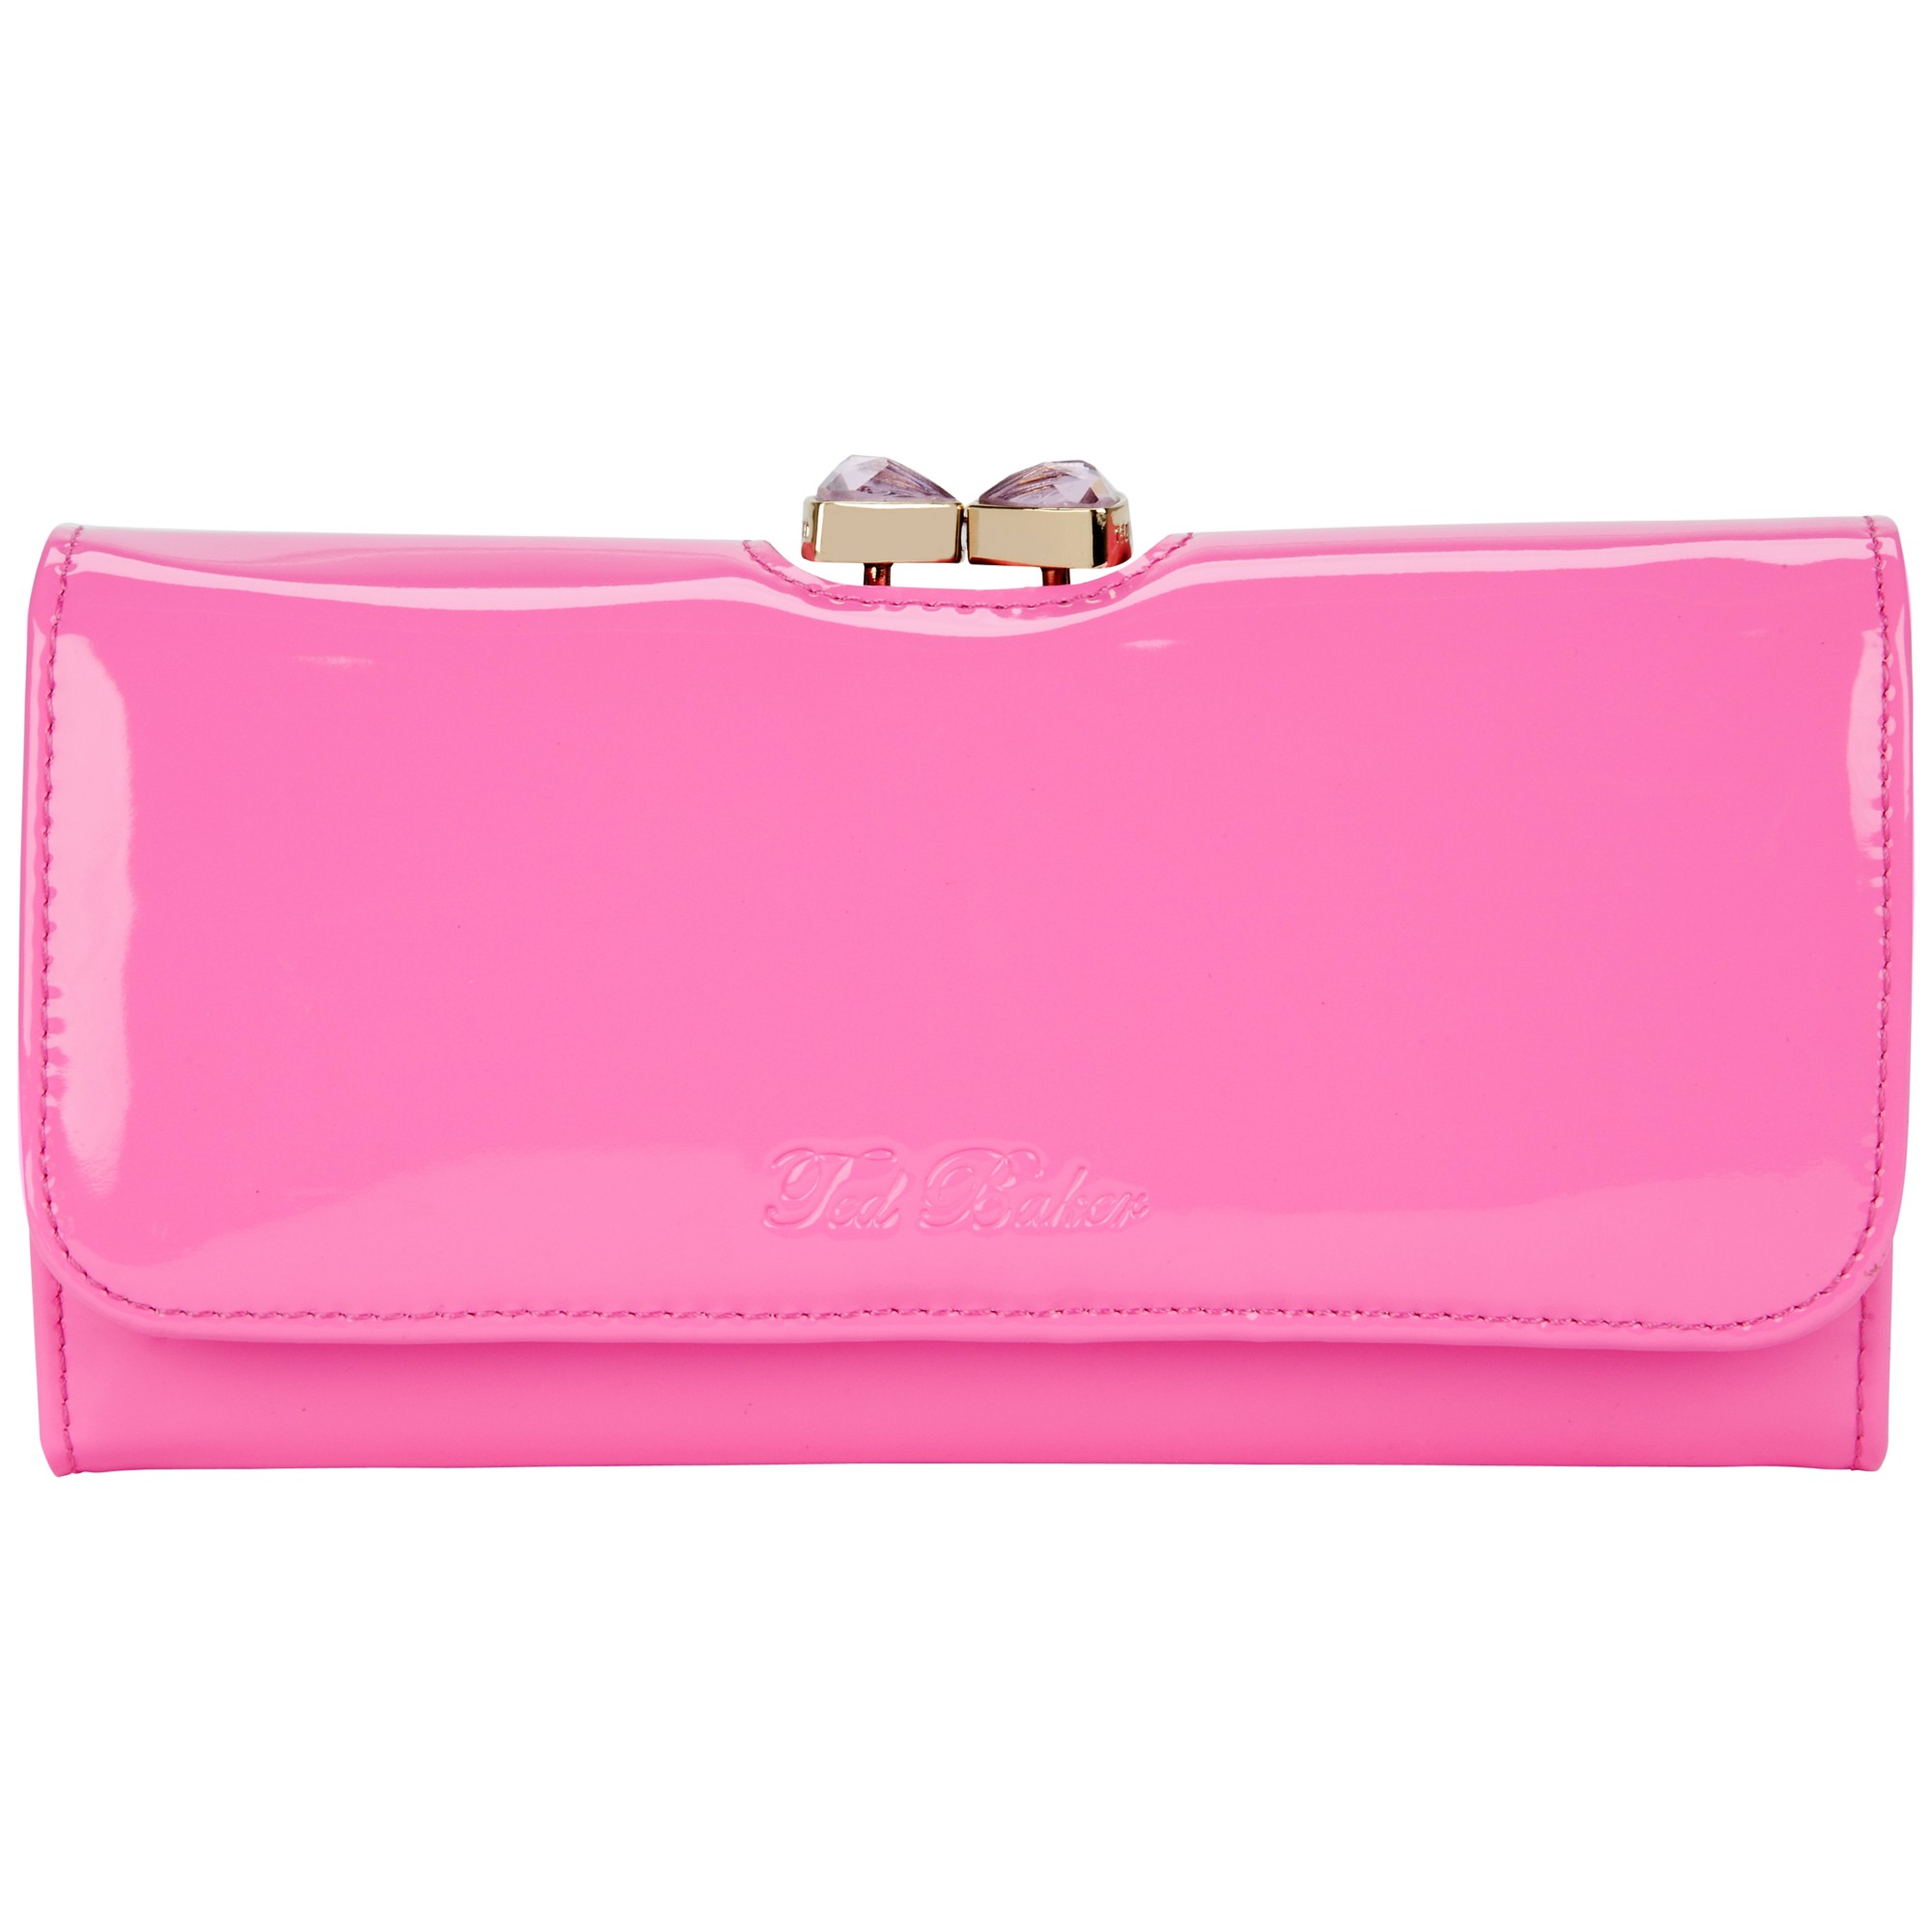 Ted Baker Titiana Crystal Bow Bobble Patent Matinee Purse in Pink - Lyst